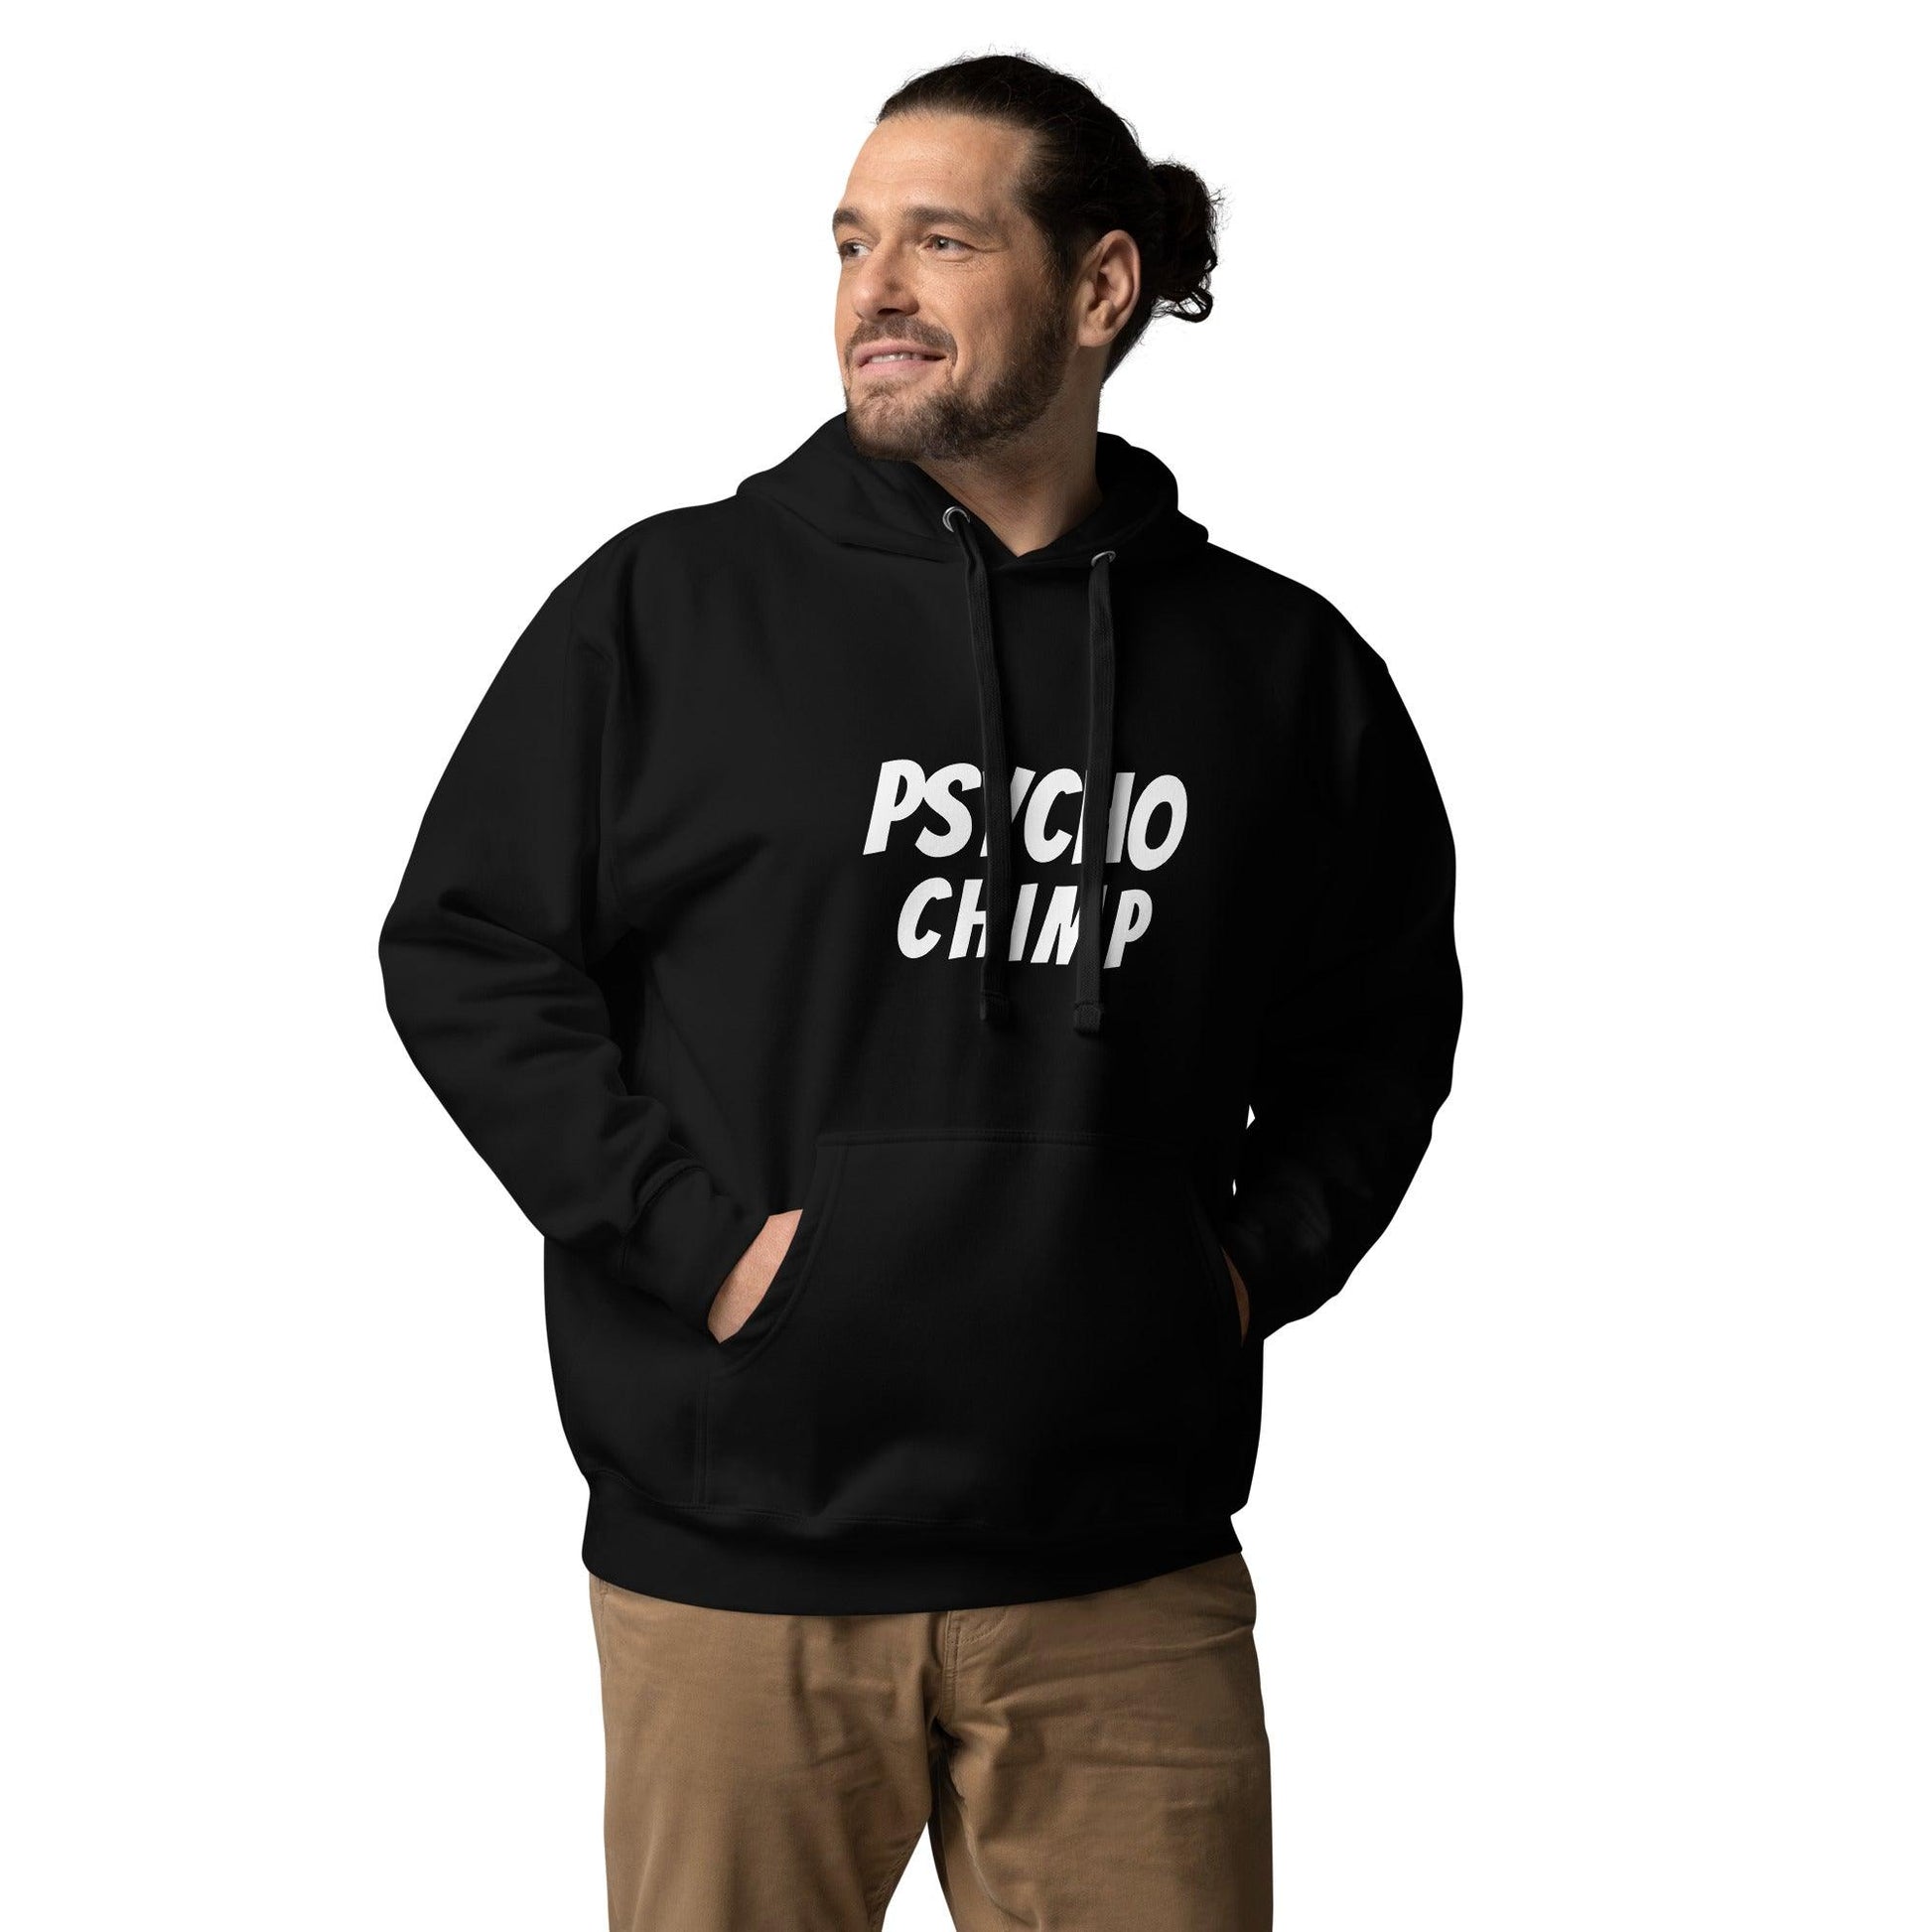 Chimped Out Hoodie - Psycho Chimp